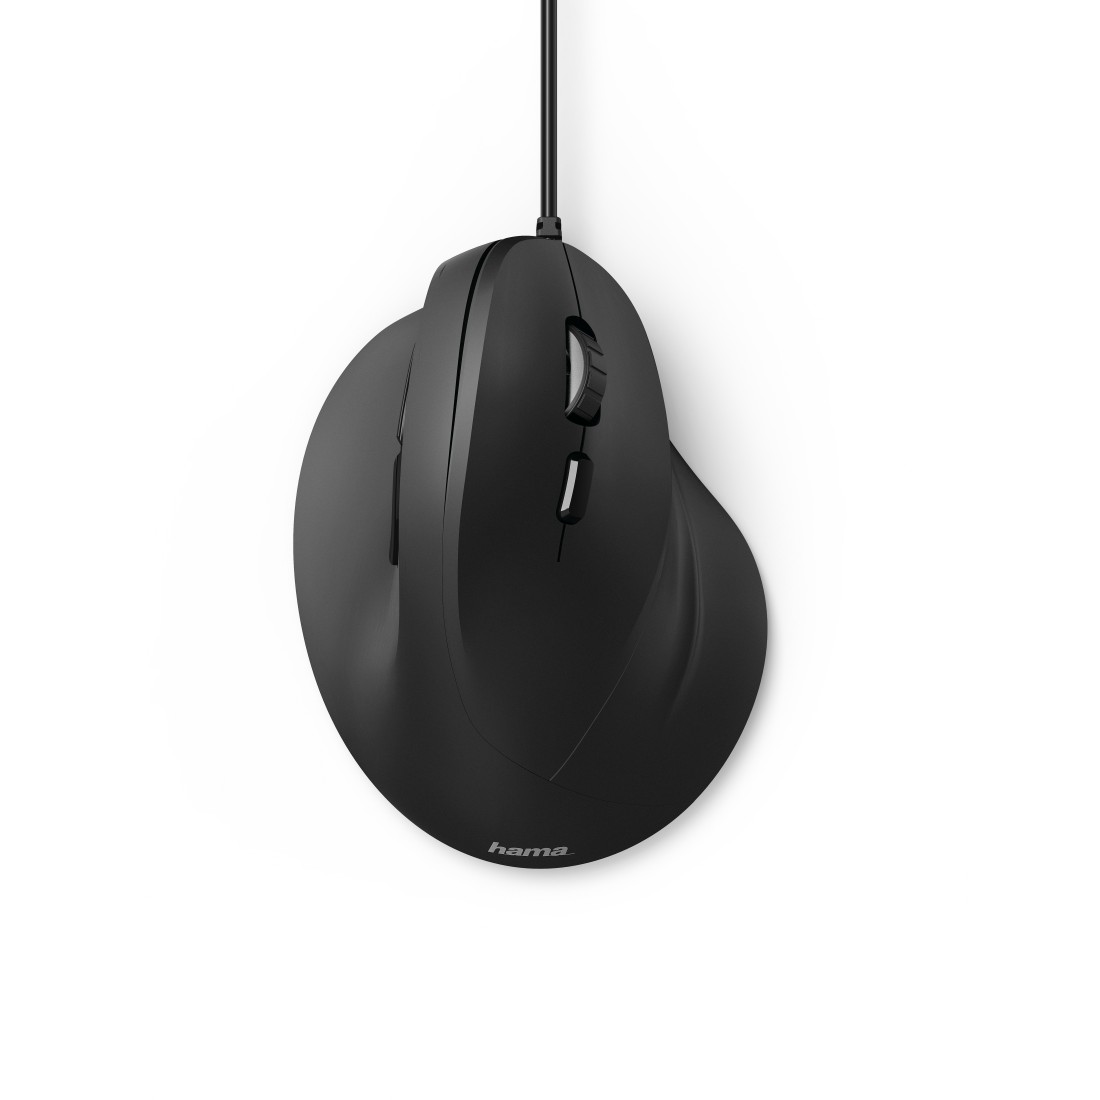 You Recently Viewed Hama Ergonomic EMC-500 6-Button Vertical Cabled Mouse Image